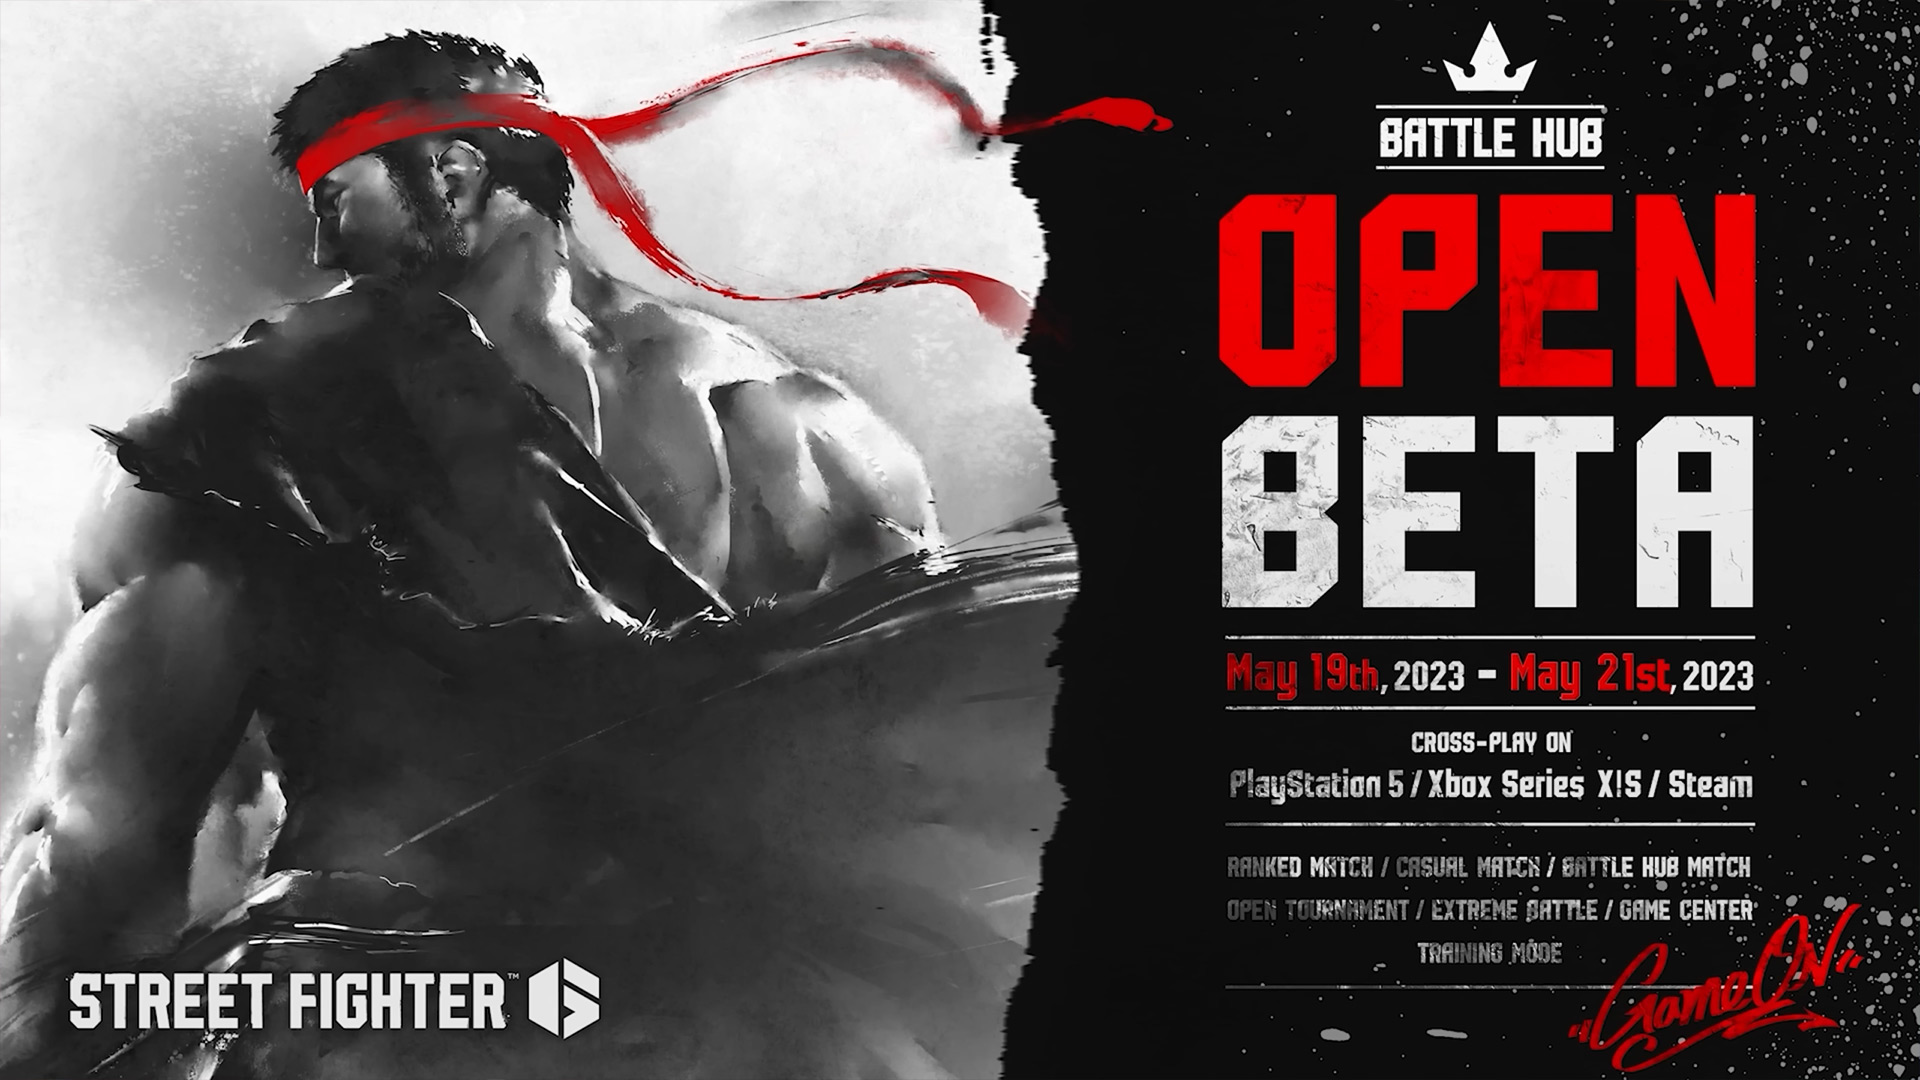 Street Fighter 6's open beta will take place May 19 to May 21